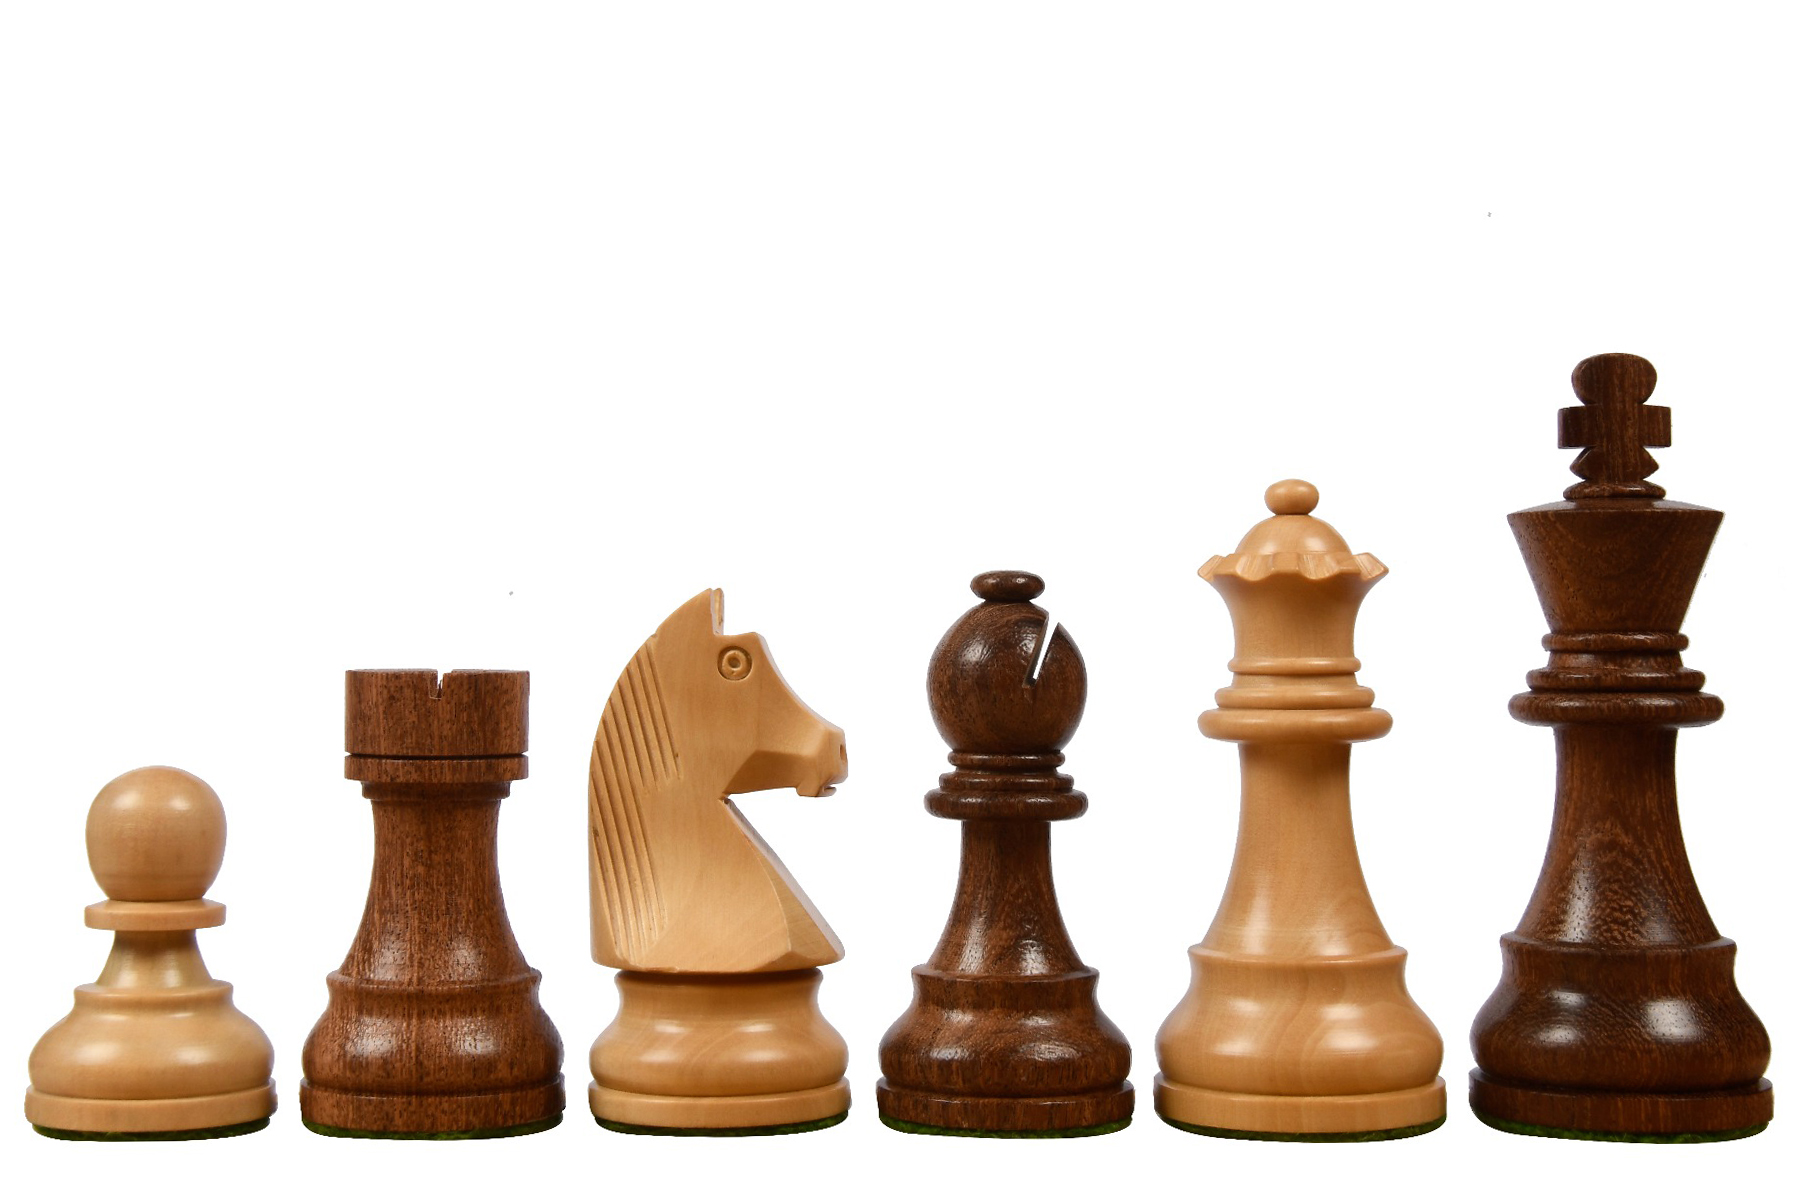 Great board. Brand New German Knight wooden chess set 